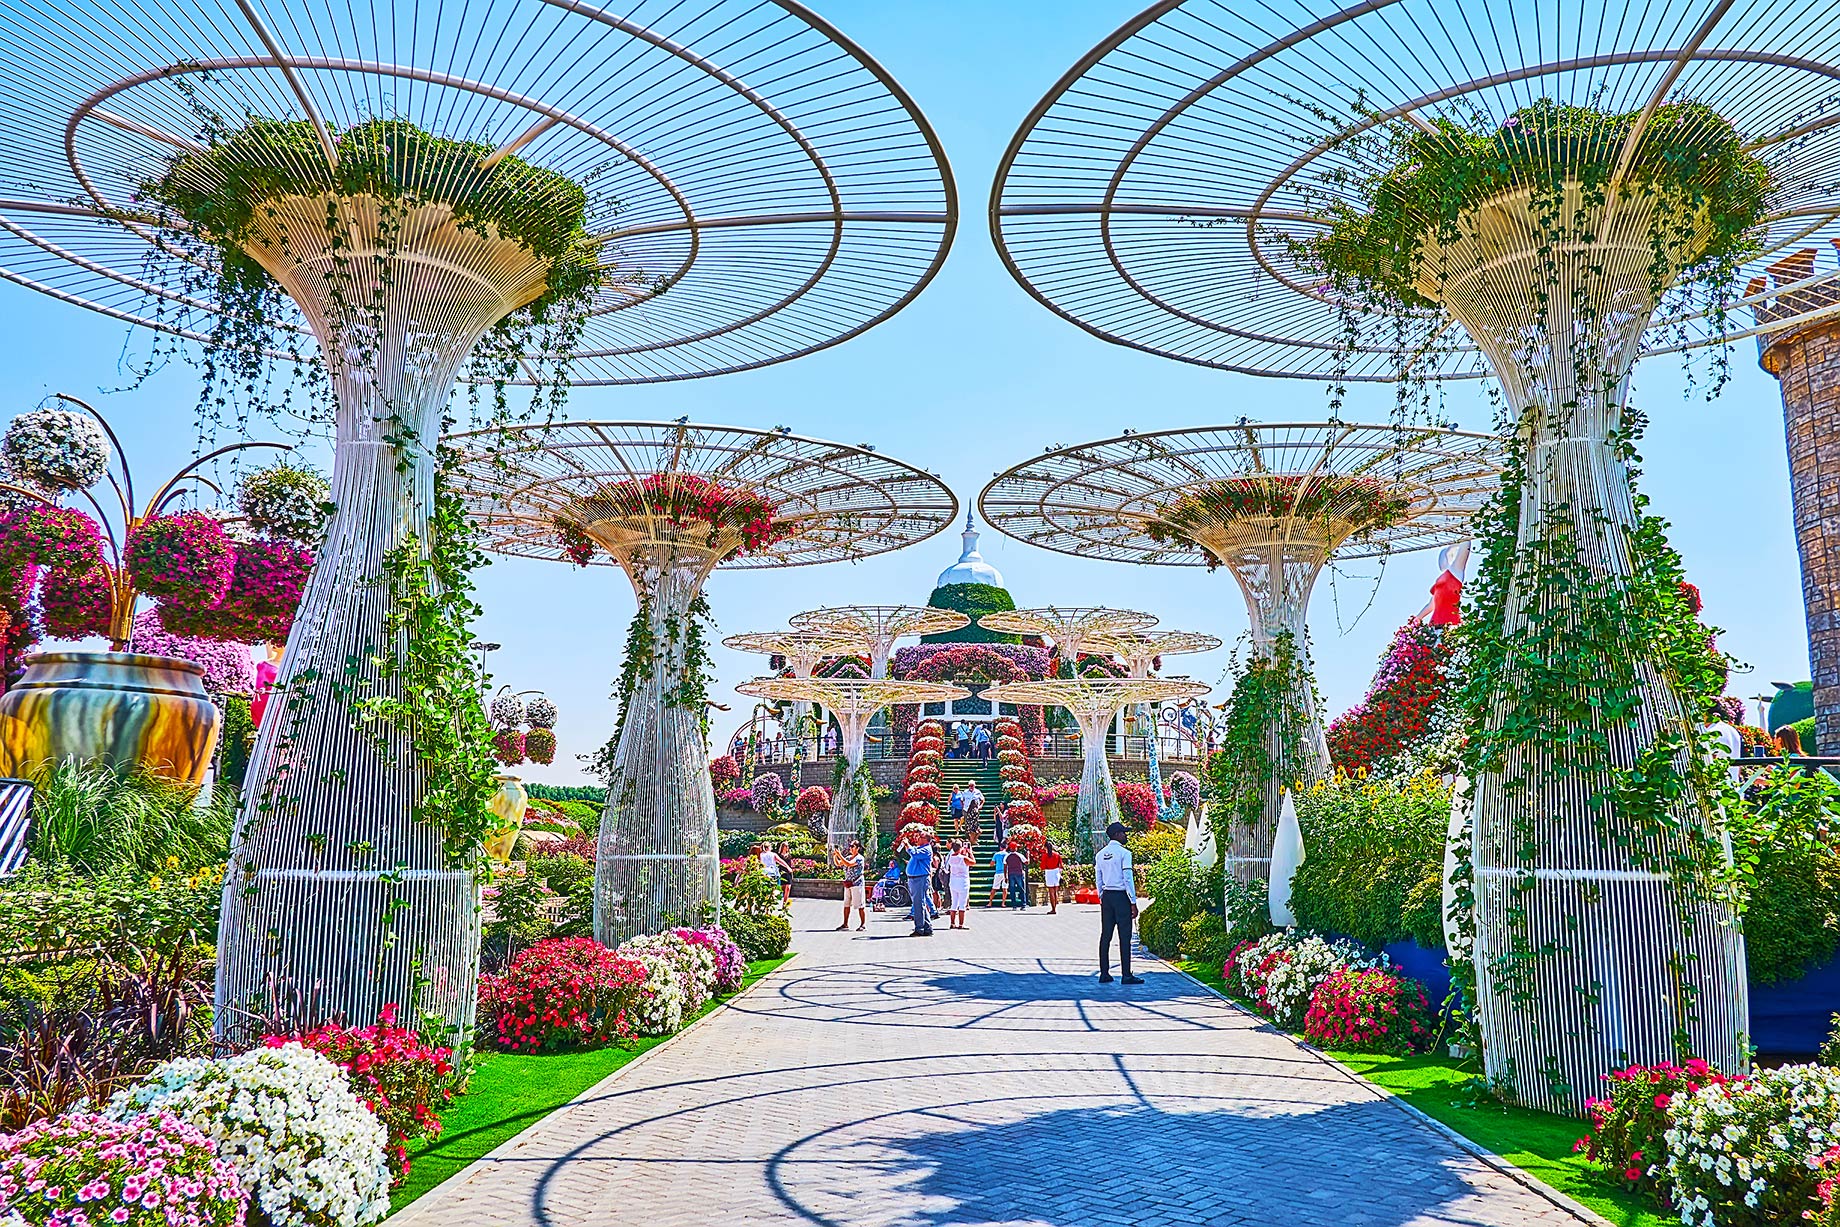 The Alley With Sunshades - Miracle Garden - Dubai, UAE